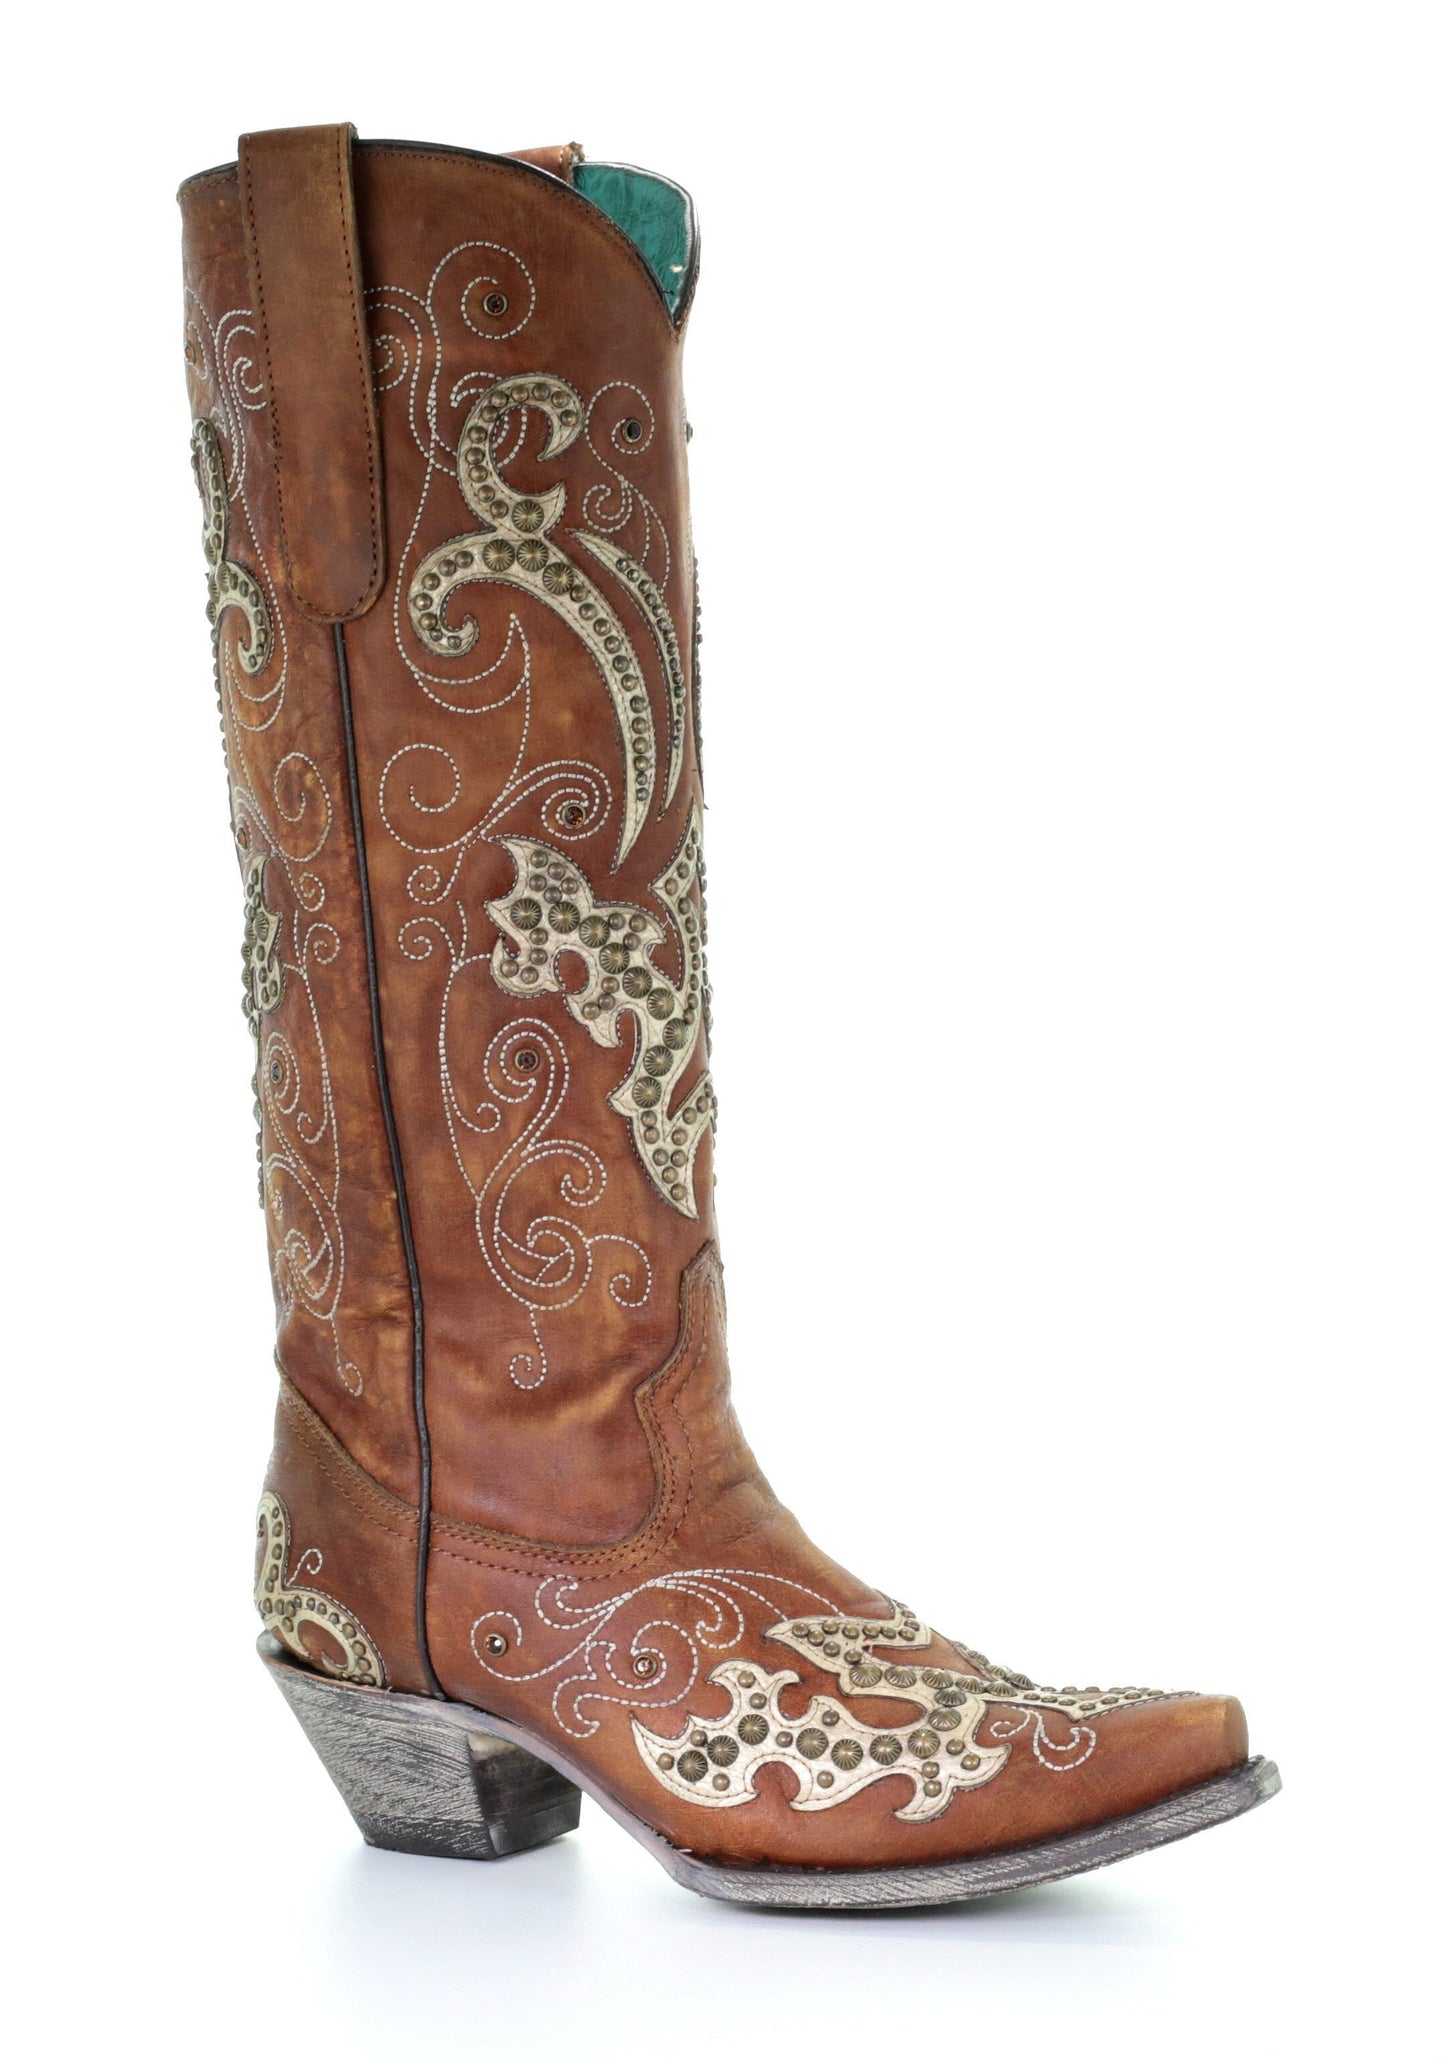 A3638 Corral Women's Brown Overlay Studs Crystals and Embroidery Boots